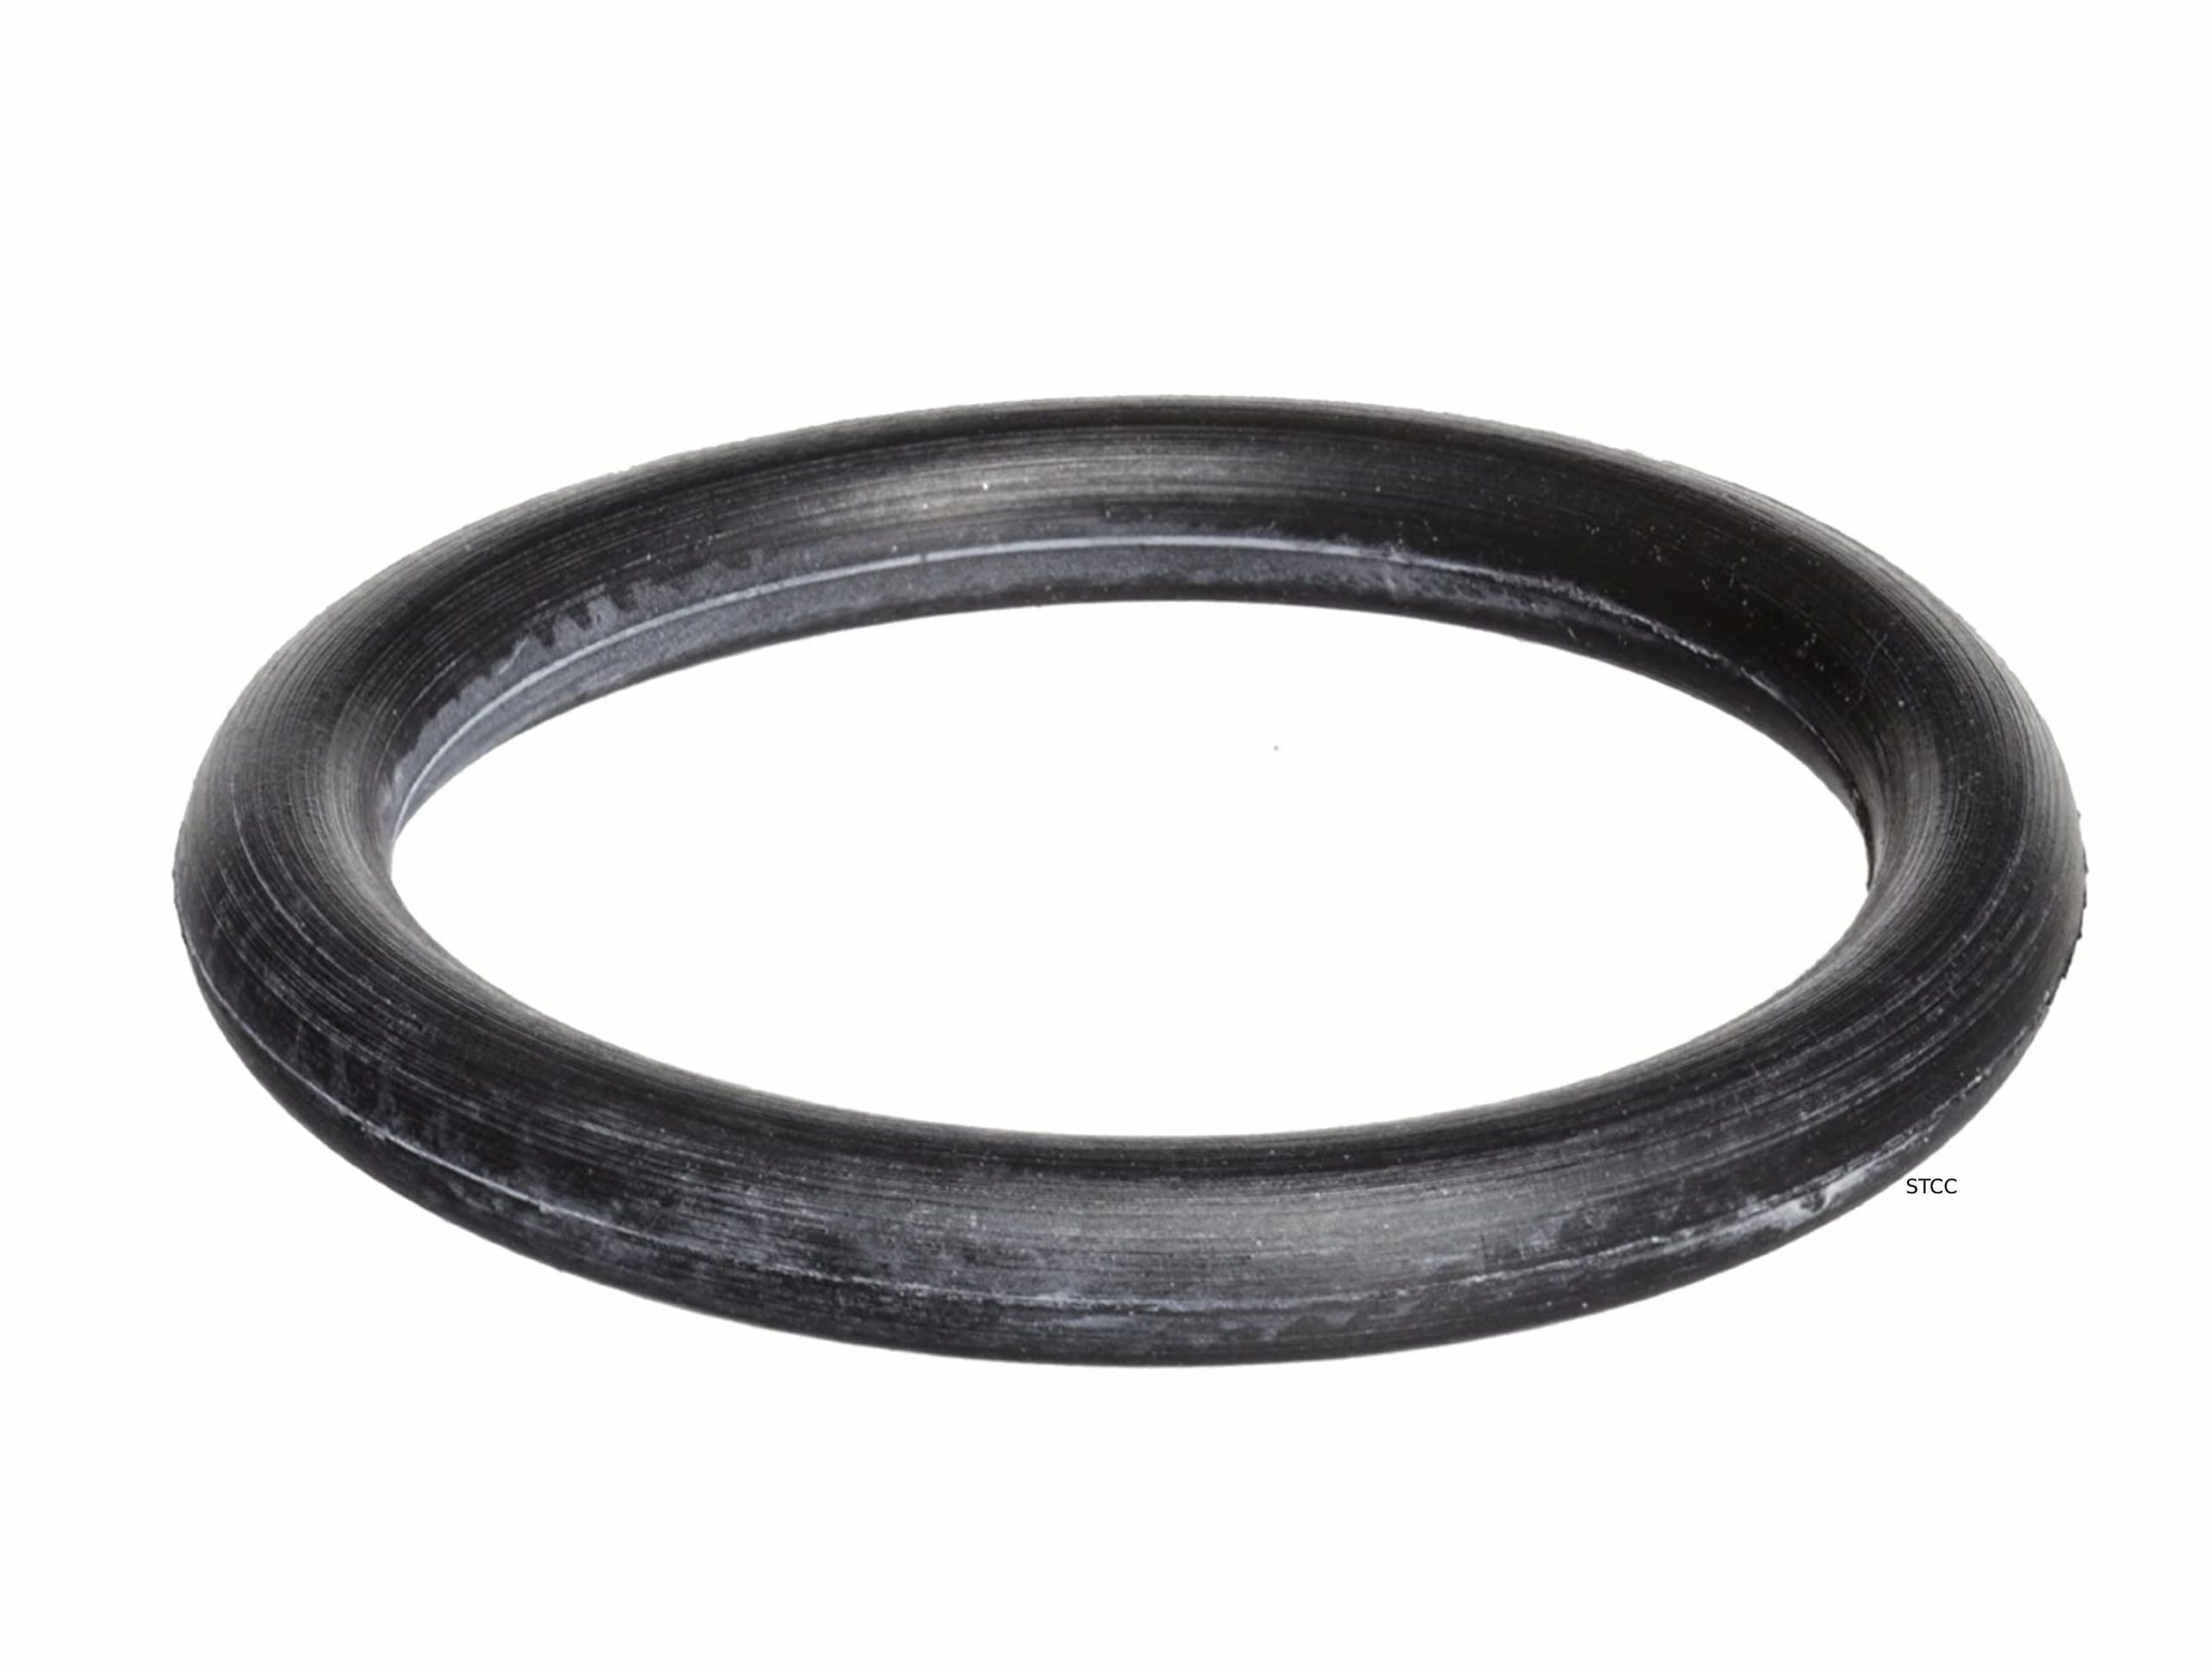 016 Buna/NBR Nitrile O-Ring 70A Durometer Black Sterling Seal and Supply 1000 Pack 